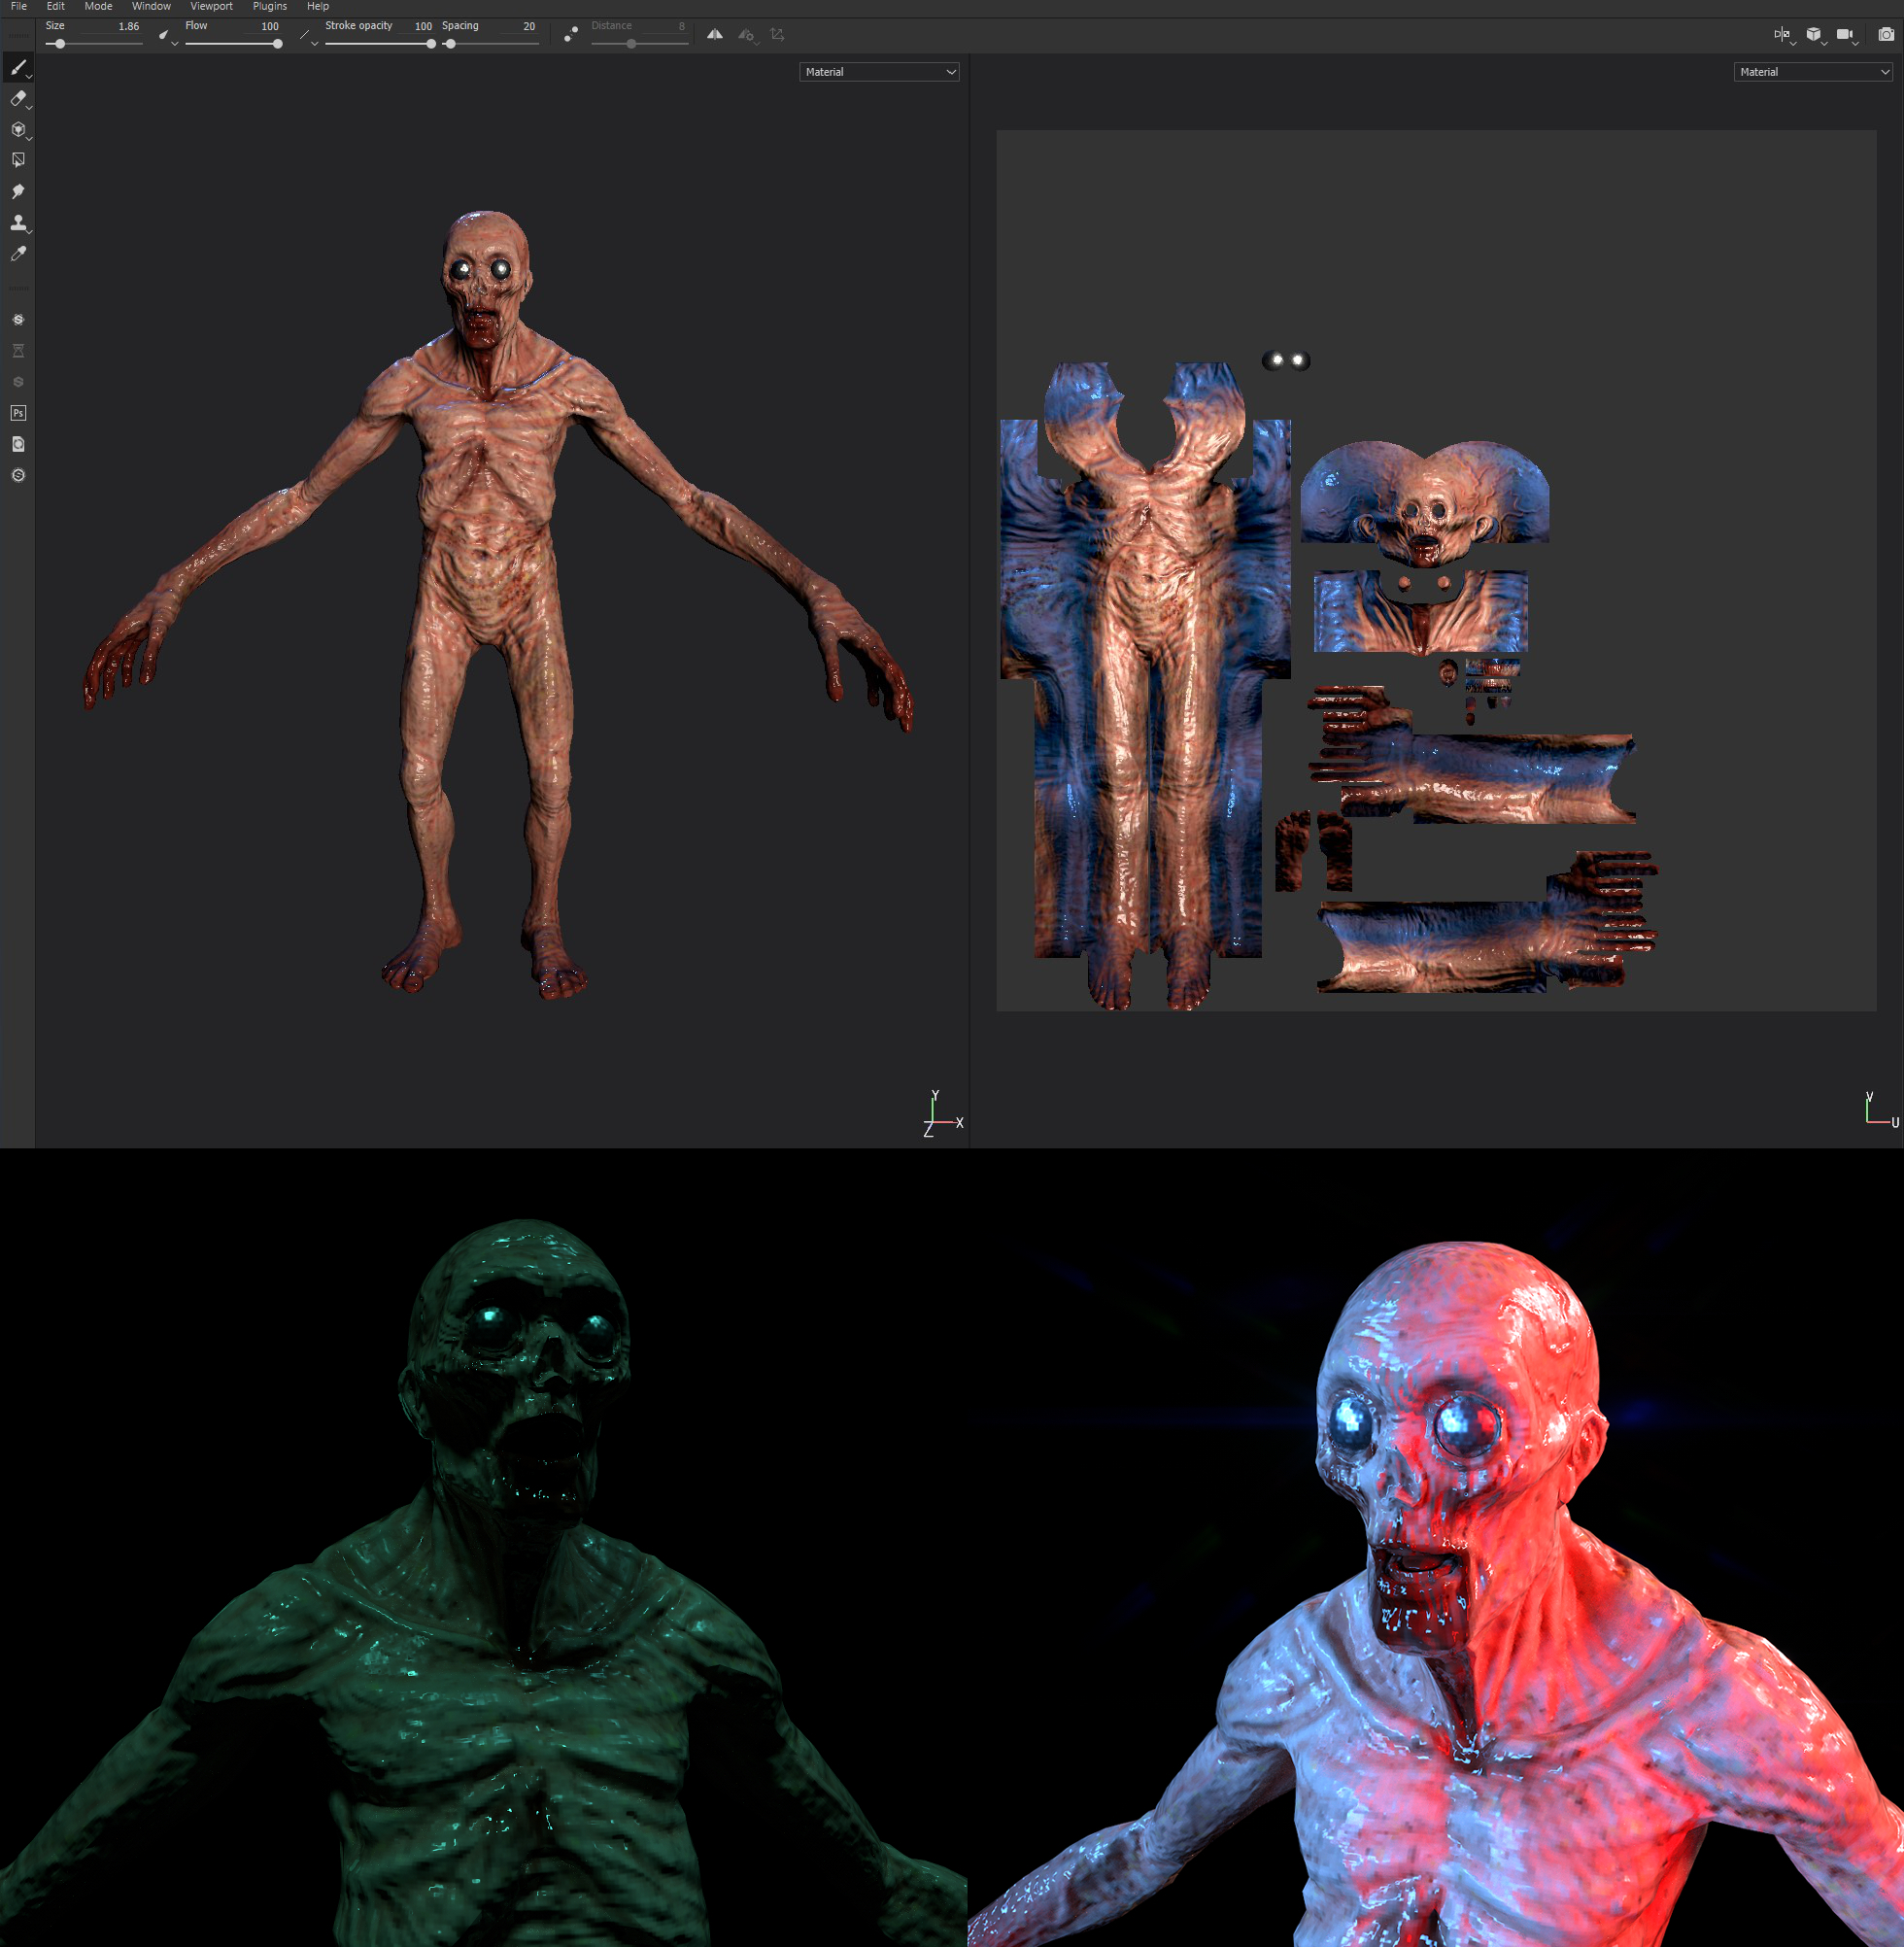 3D model SCP-173 - Low-poly 3D model - Includes mod for SCP CB VR / AR /  low-poly